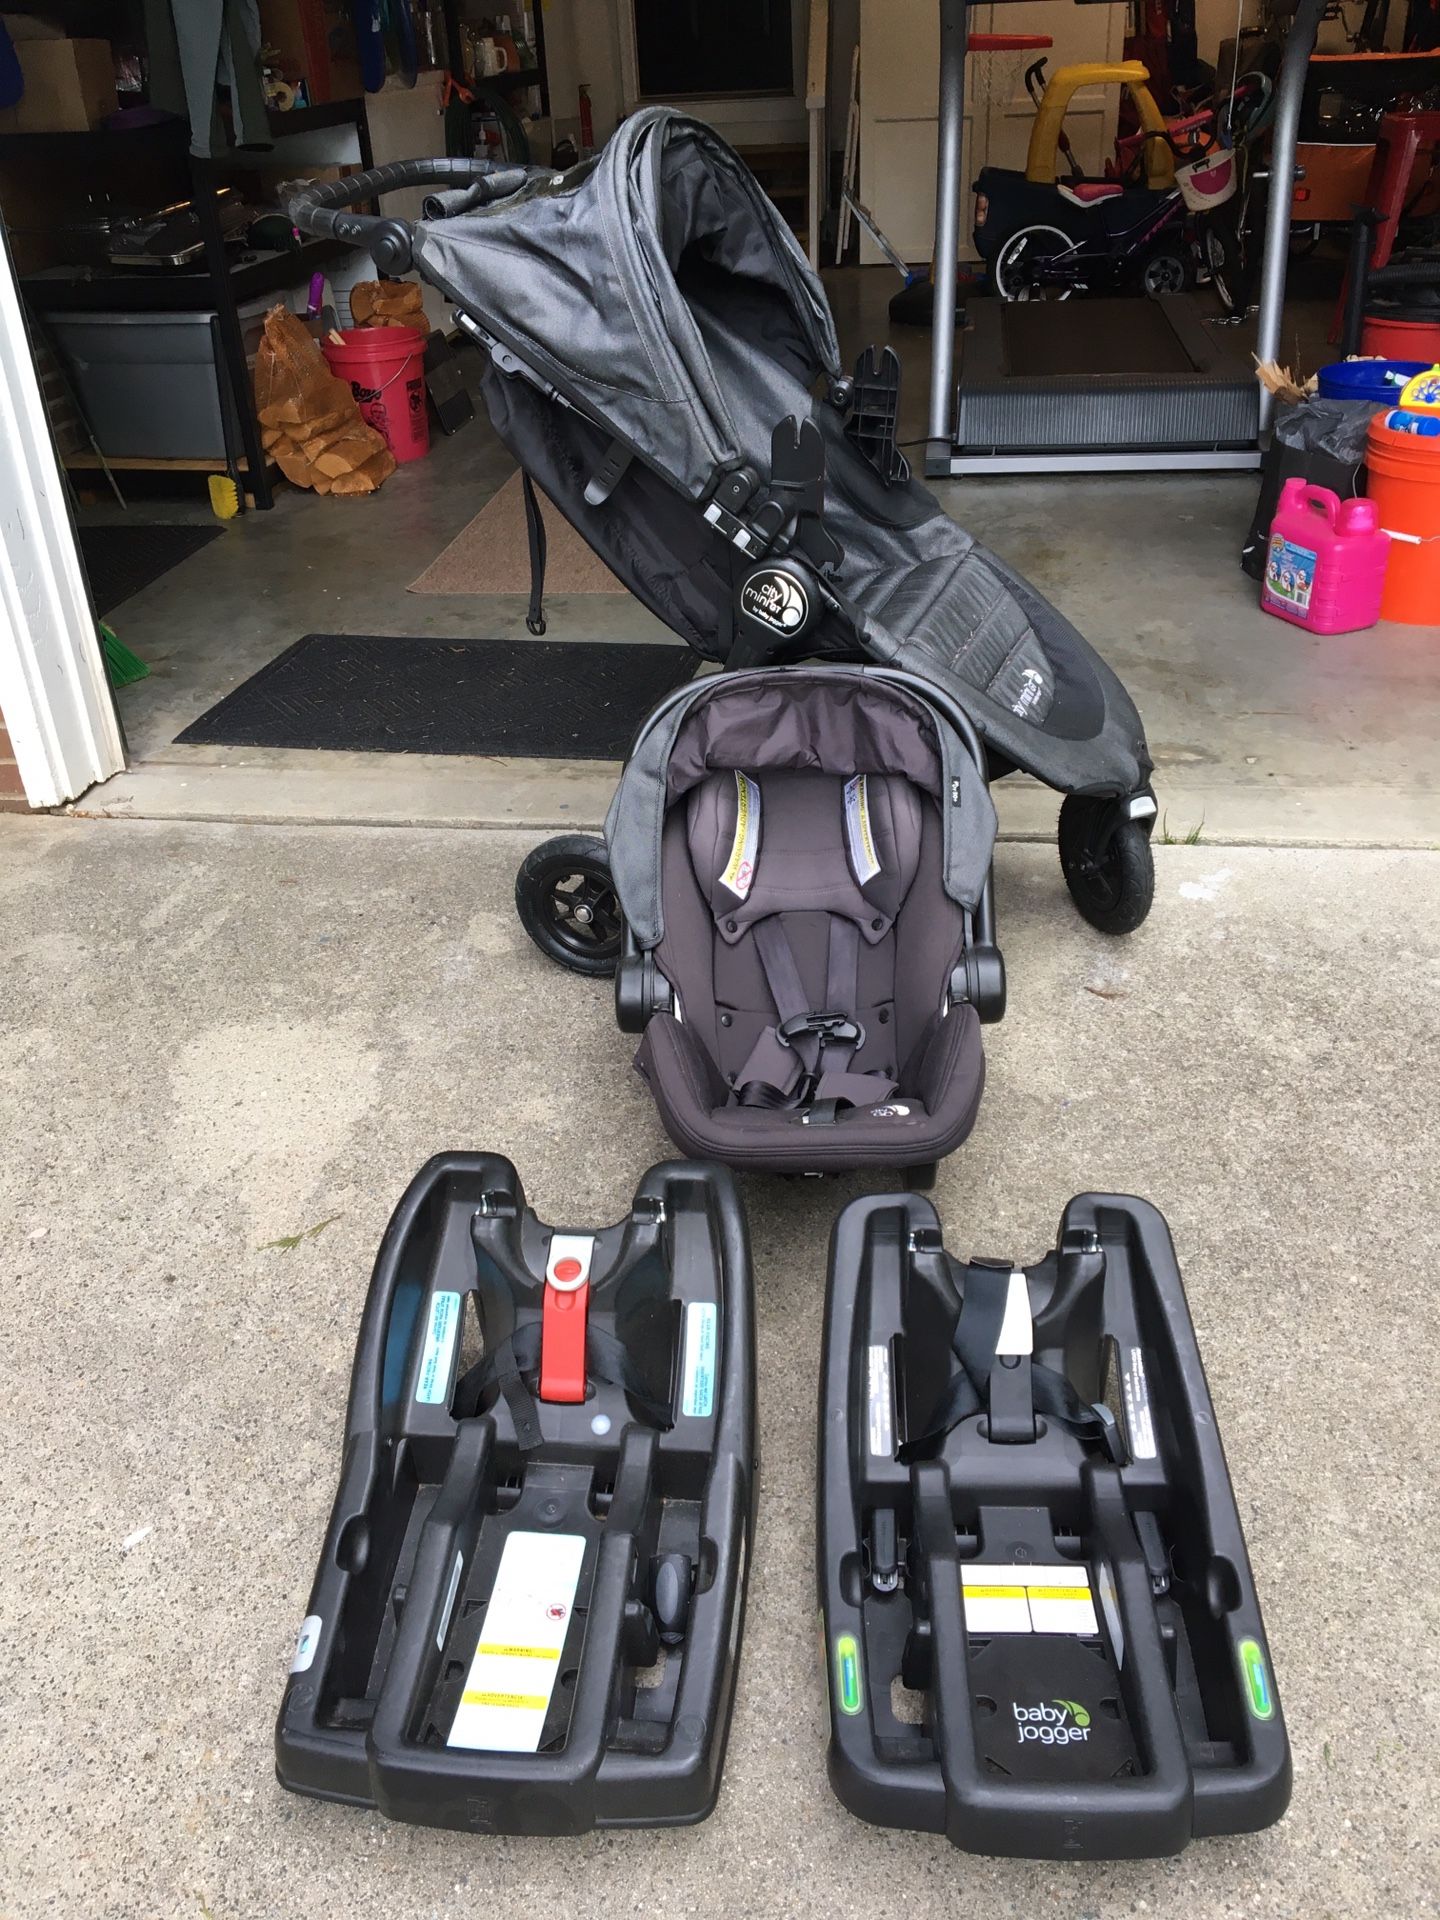 Baby Jogger Stroller, Car Seat, Bases, $175